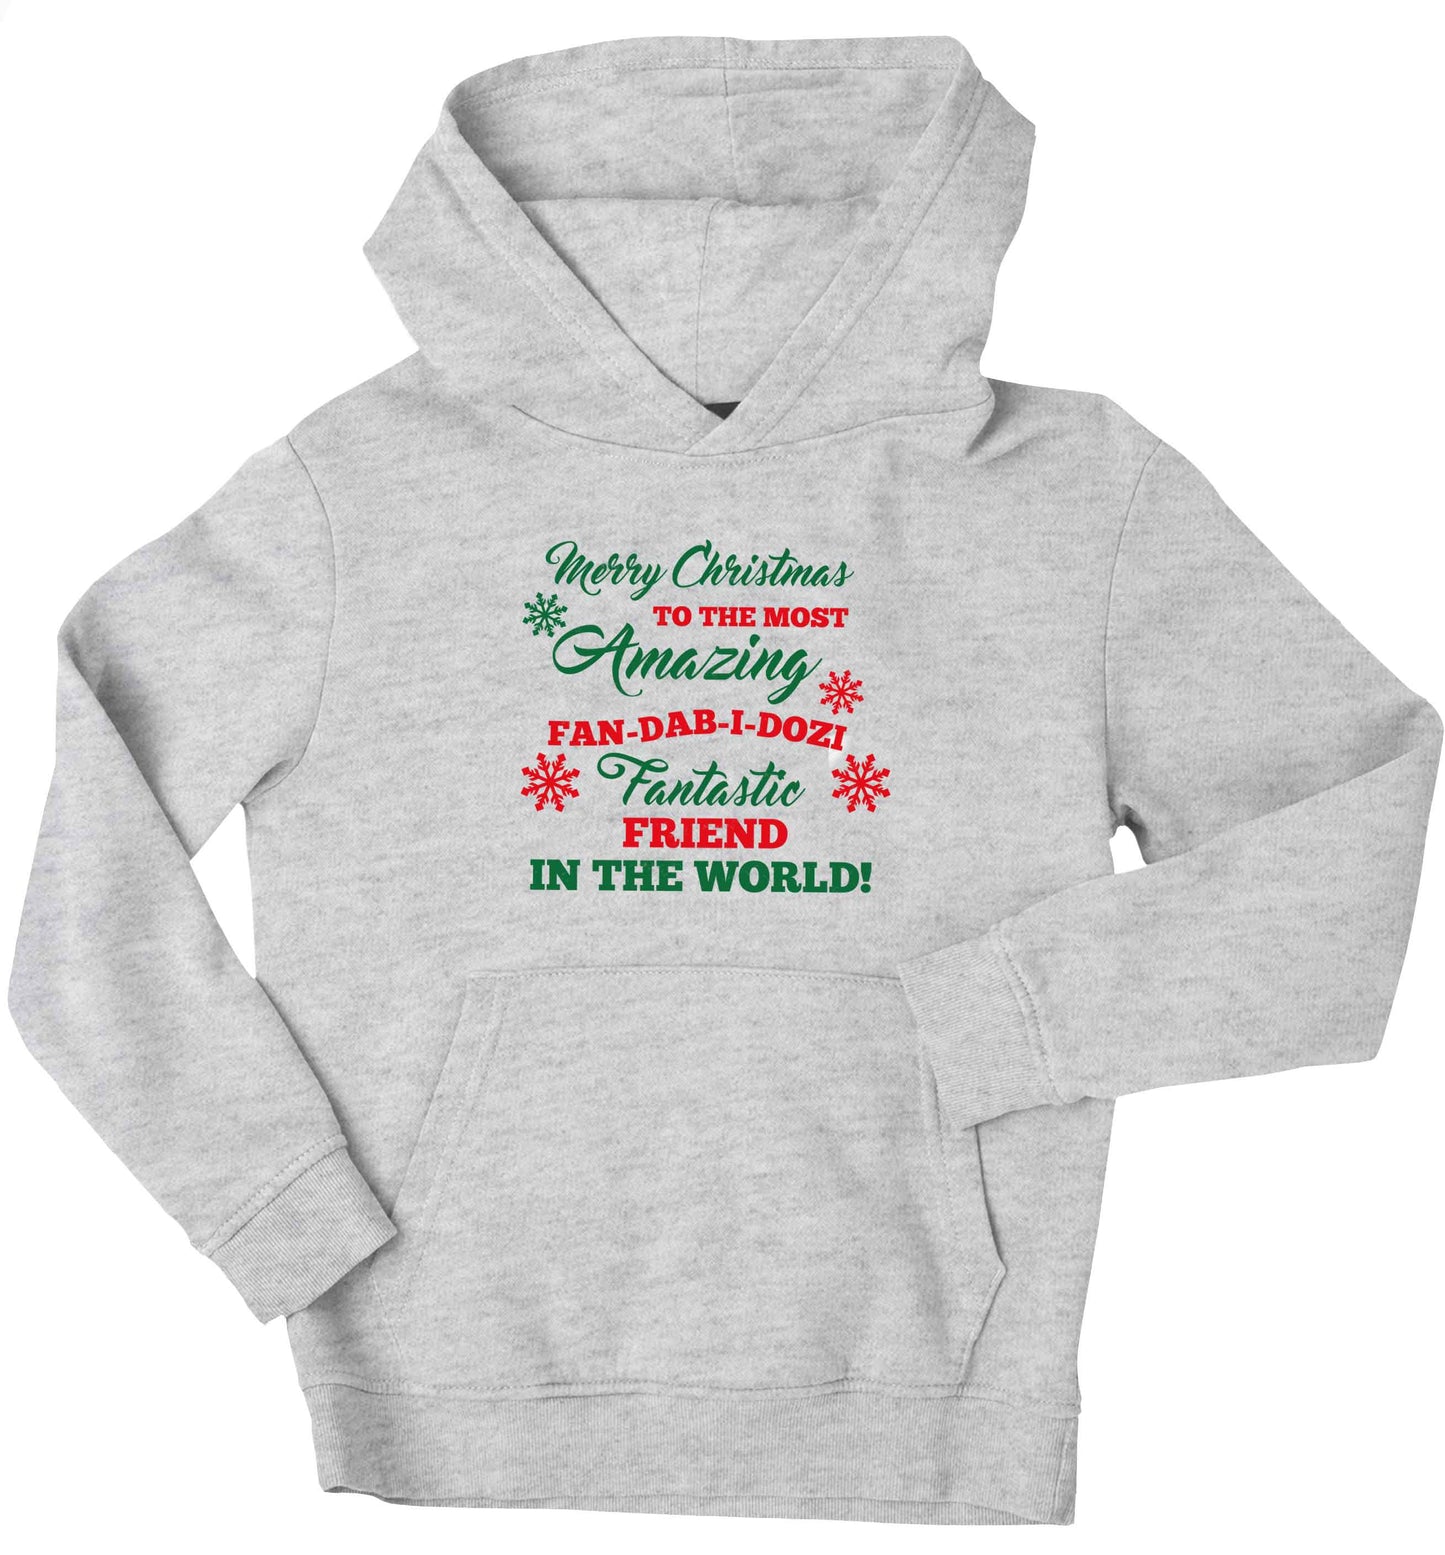 Merry Christmas to the most amazing fan-dab-i-dozi fantasic friend in the world children's grey hoodie 12-13 Years